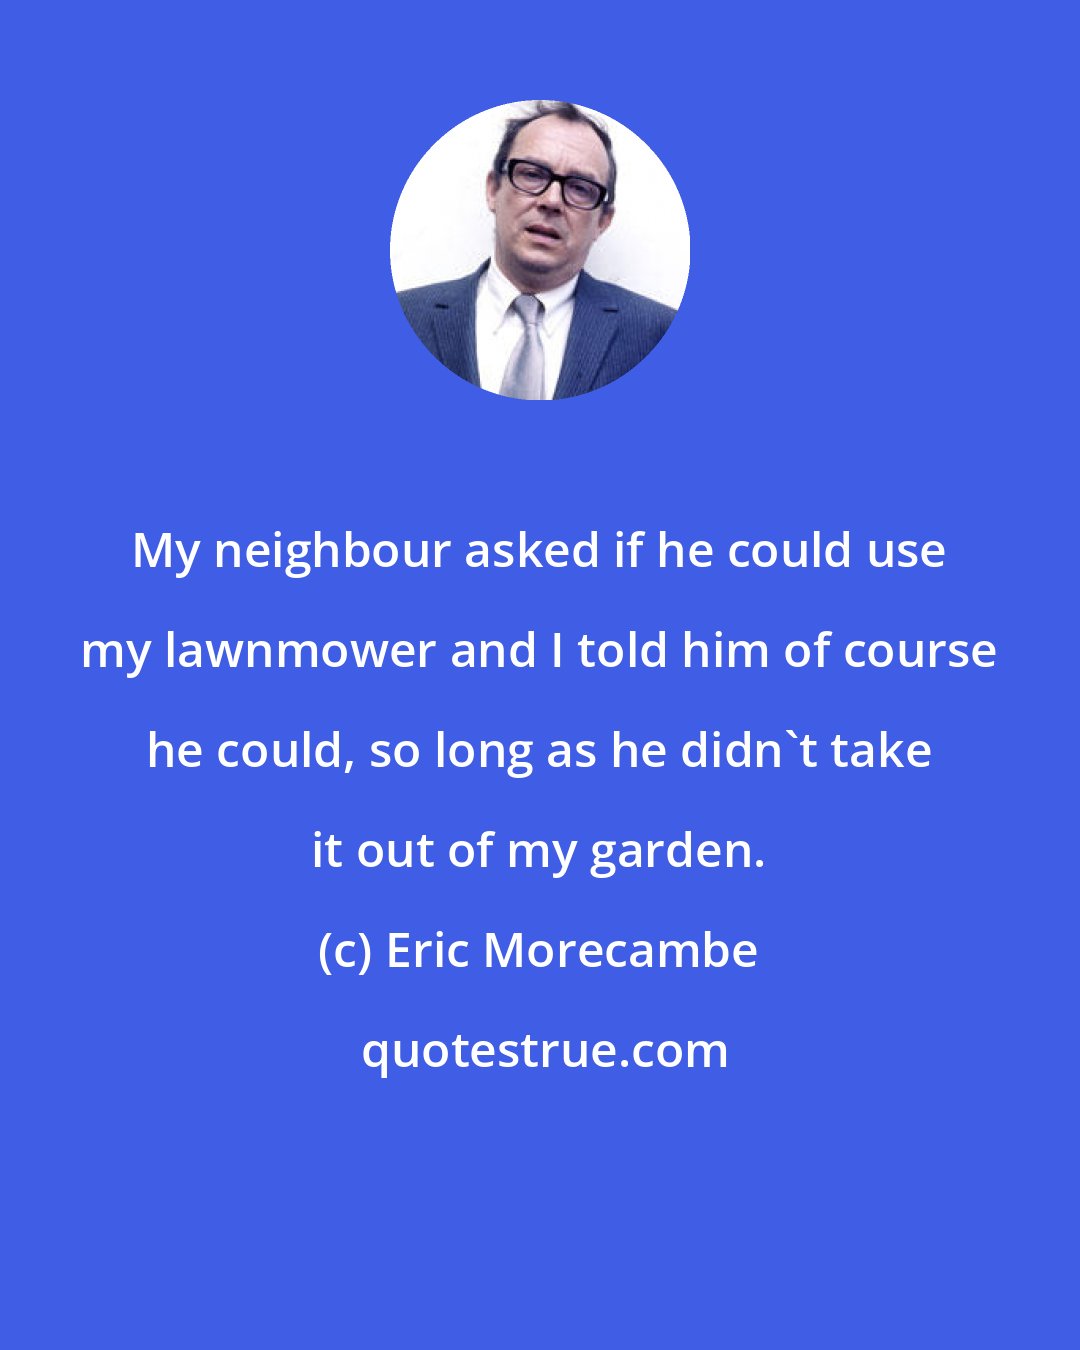 Eric Morecambe: My neighbour asked if he could use my lawnmower and I told him of course he could, so long as he didn't take it out of my garden.